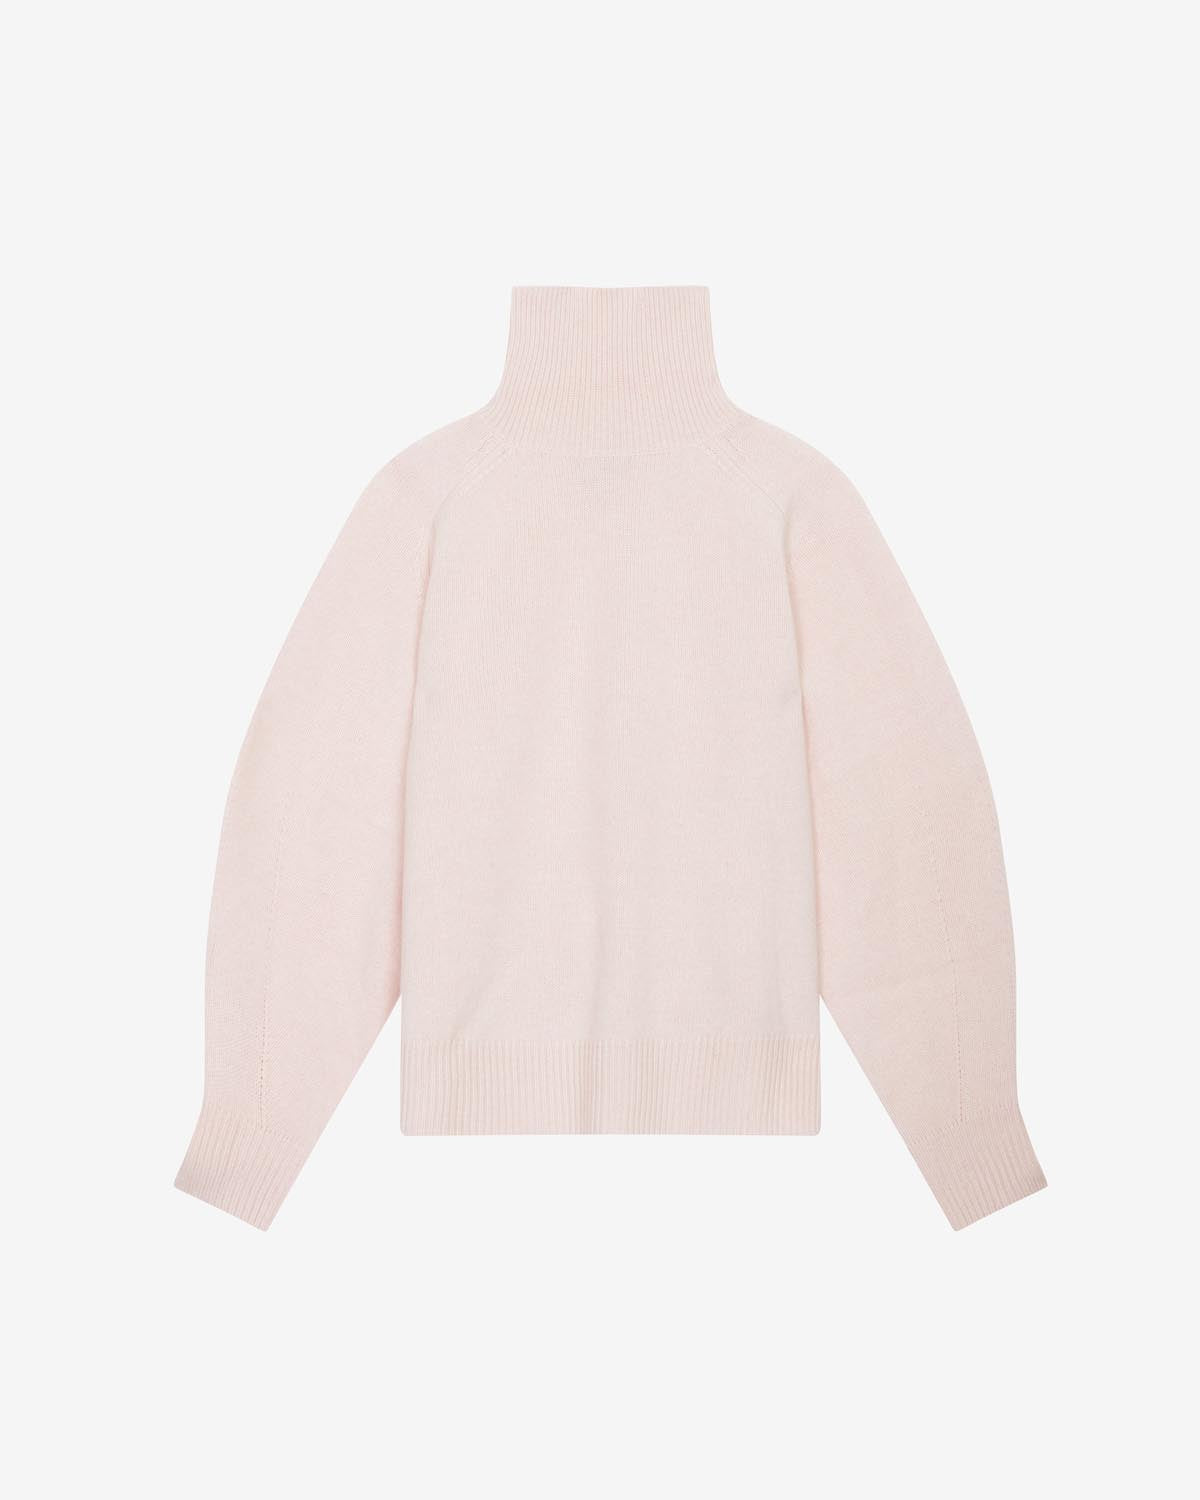 Linelli pullover Woman Light pink 1